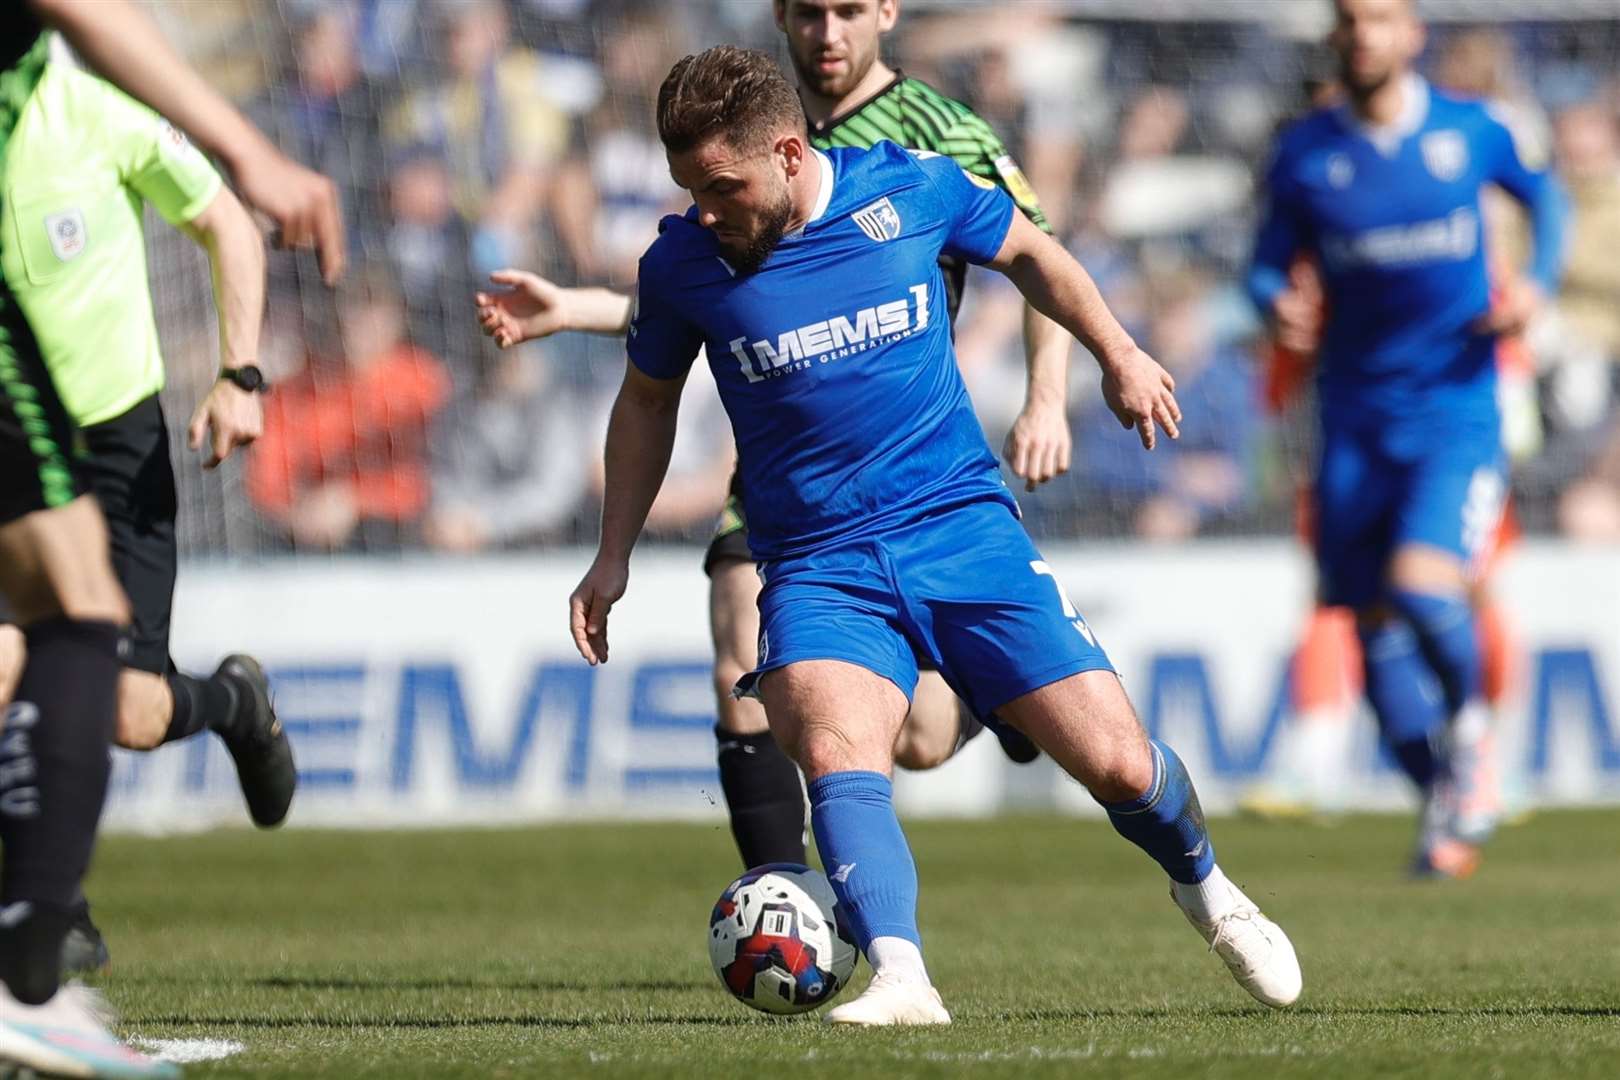 Alex MacDonald with the ball for Gillingham against Doncaster at Priestfield